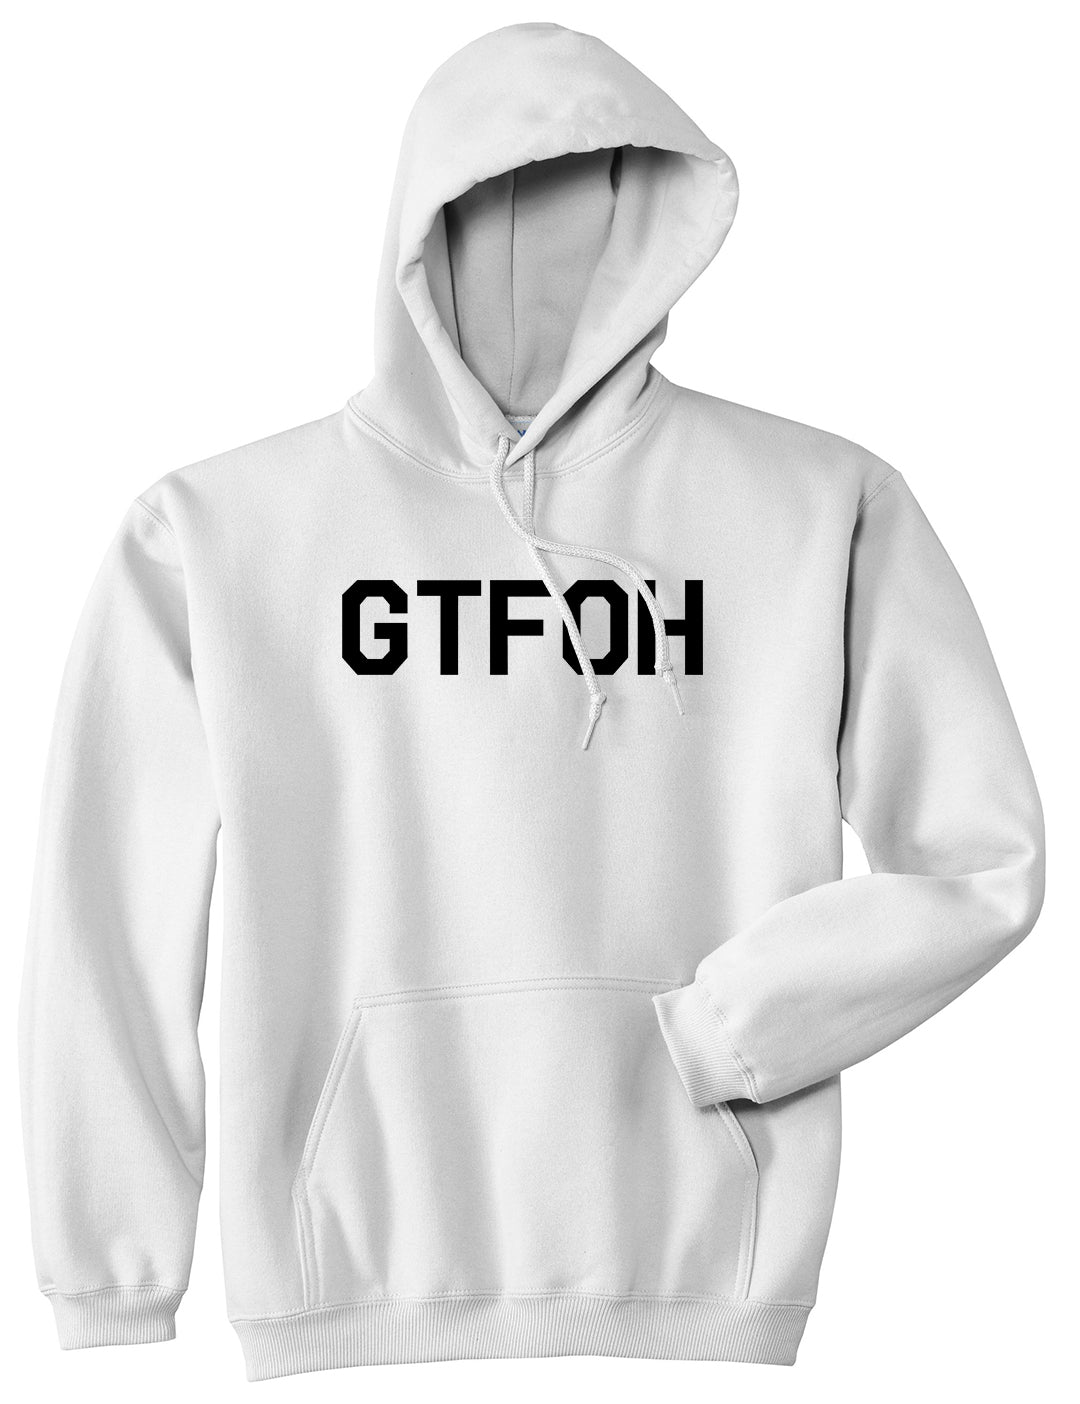 GTFOH White Pullover Hoodie by Kings Of NY